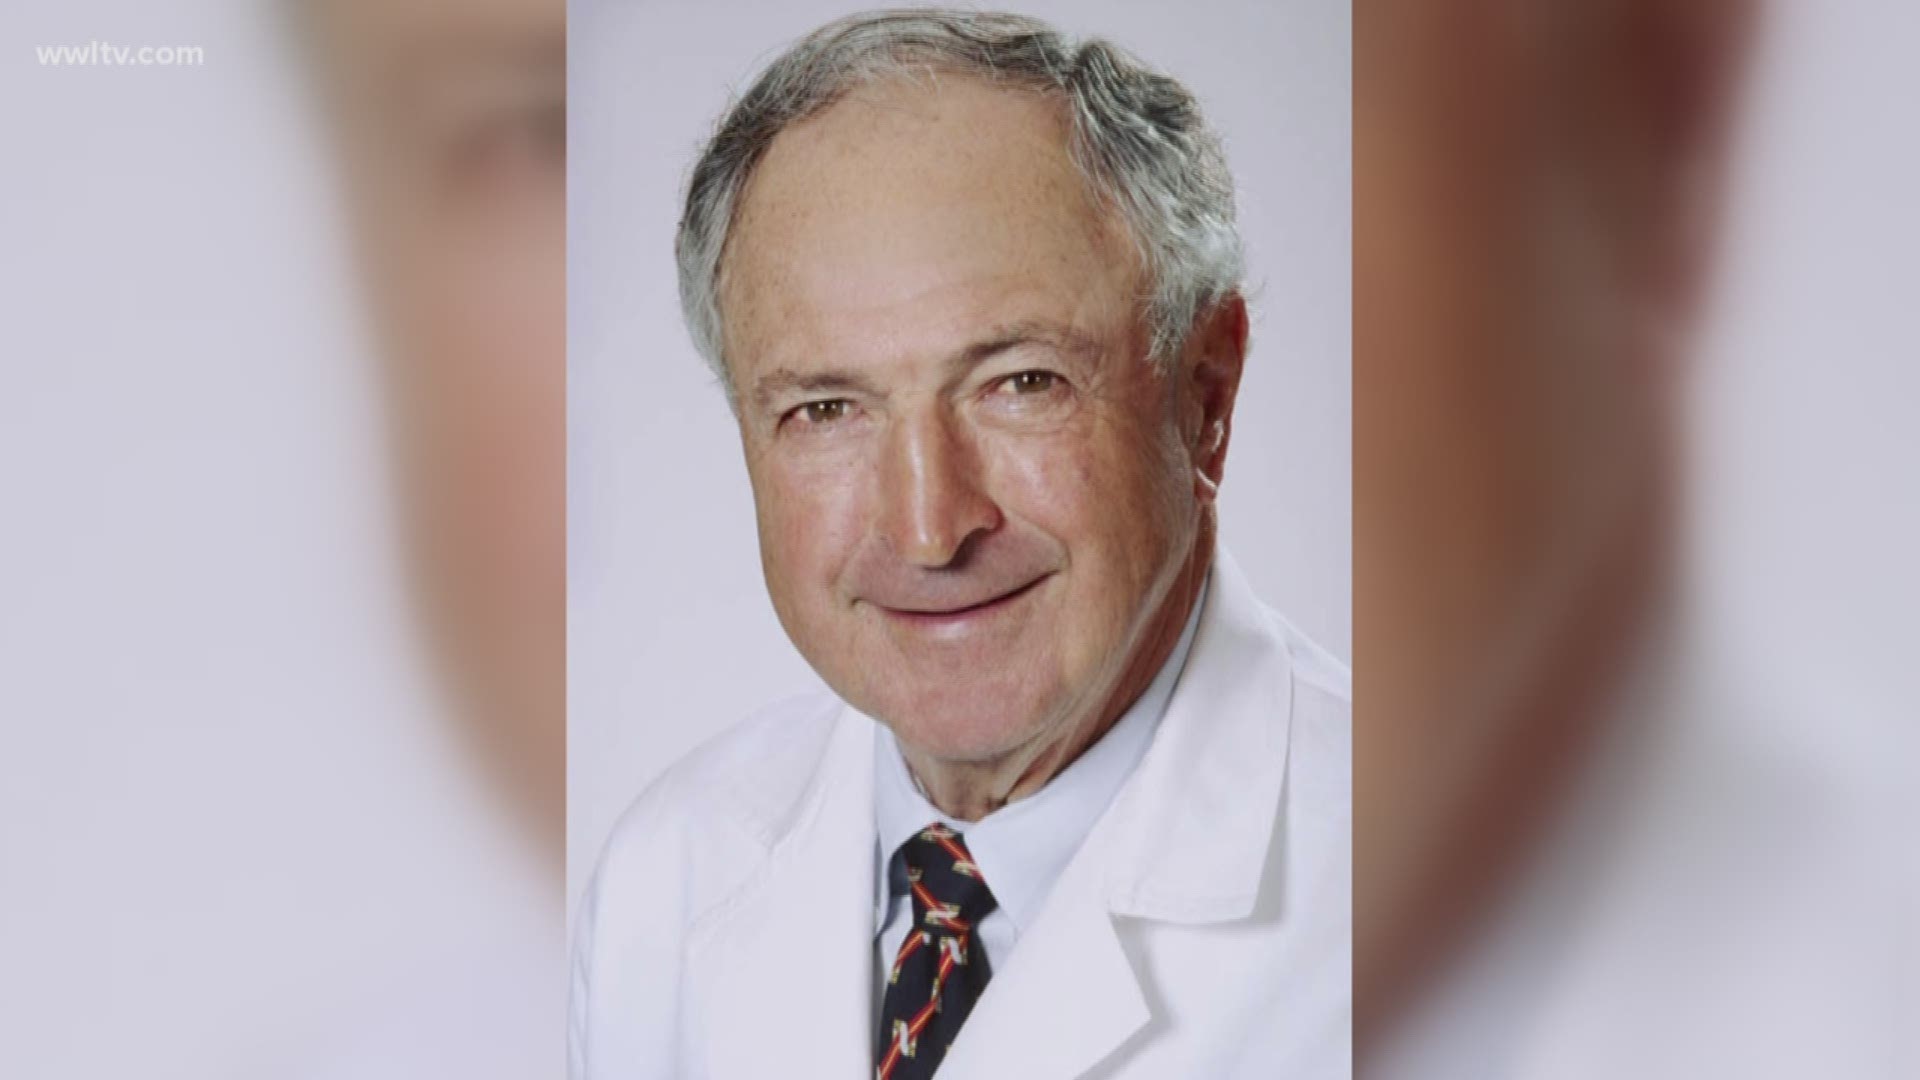 Dr. John Ochsner Sr. performed the first transplant in Louisiana and became internationally-known as a heart surgeon and medical educator, and leader at Ochsner Health System, which his father co-founded.